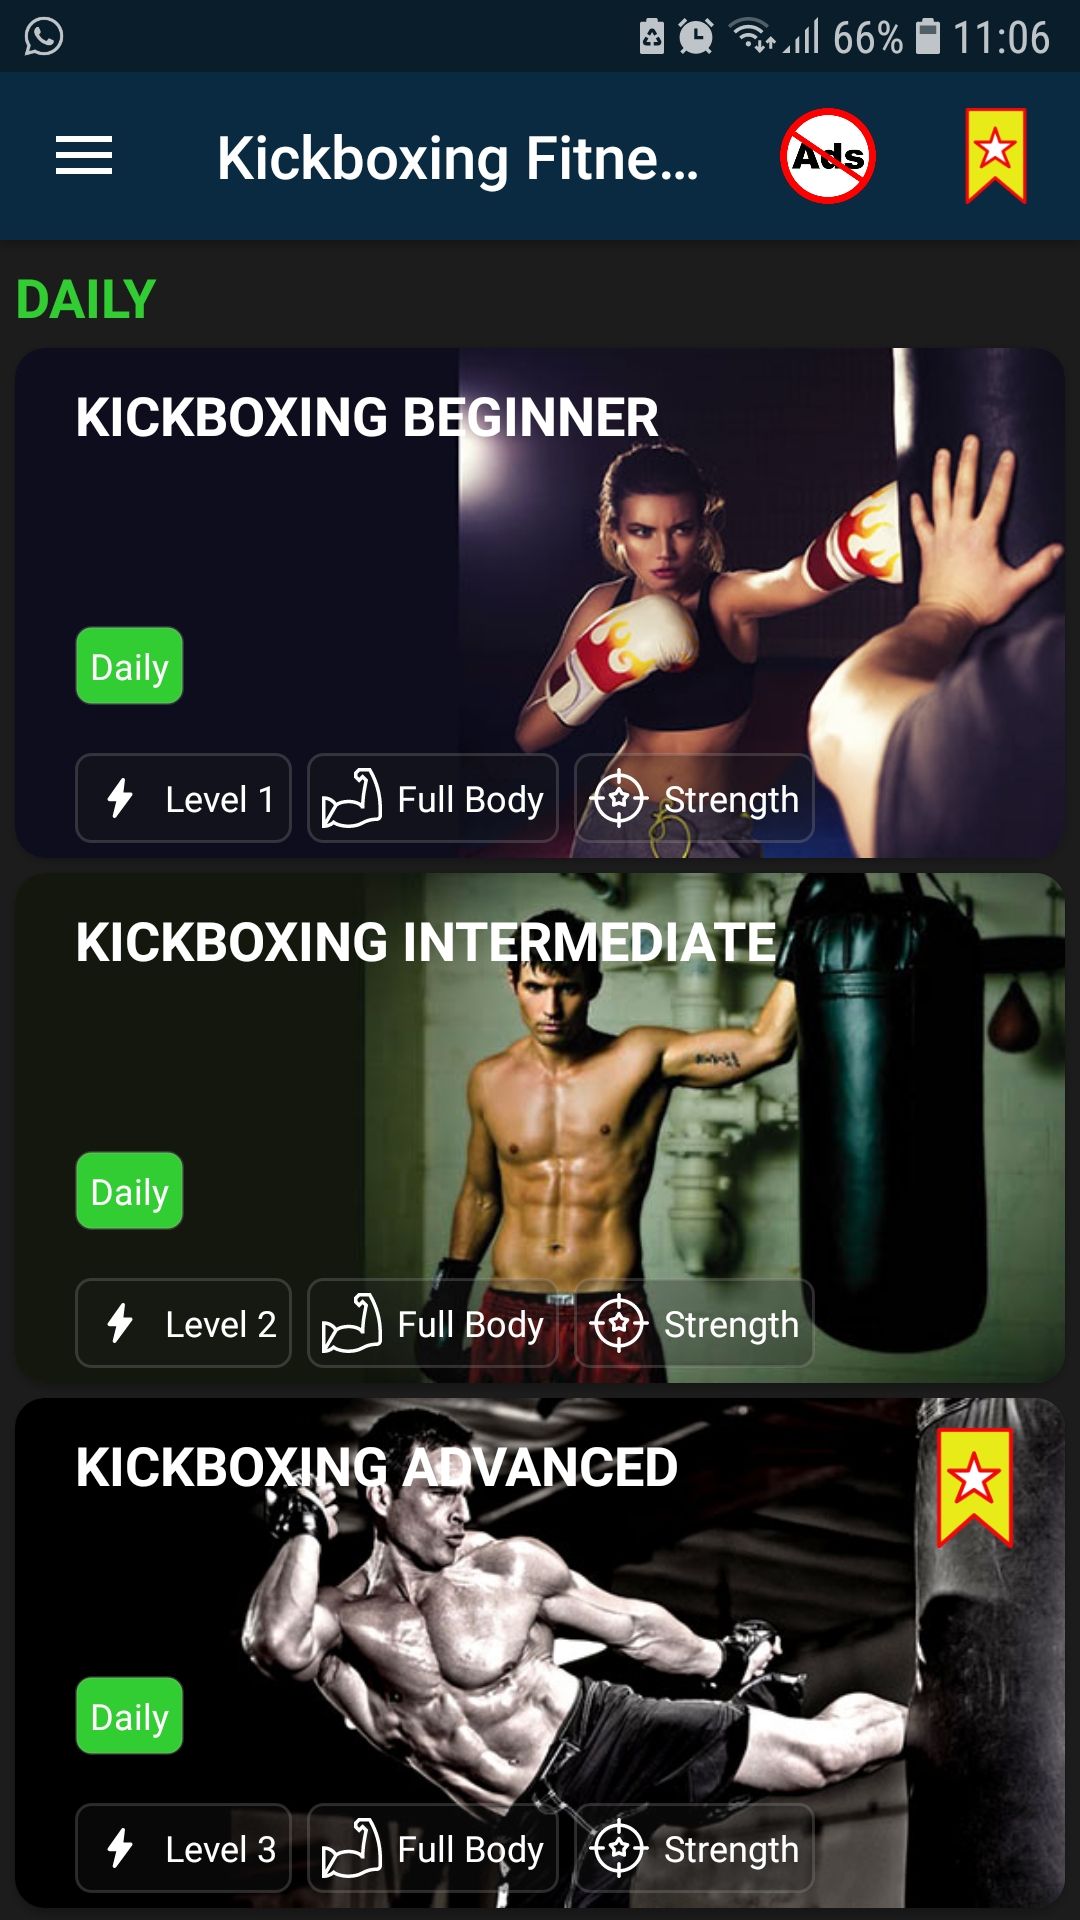 Kickboxing Fitness Workout mobile fitness app